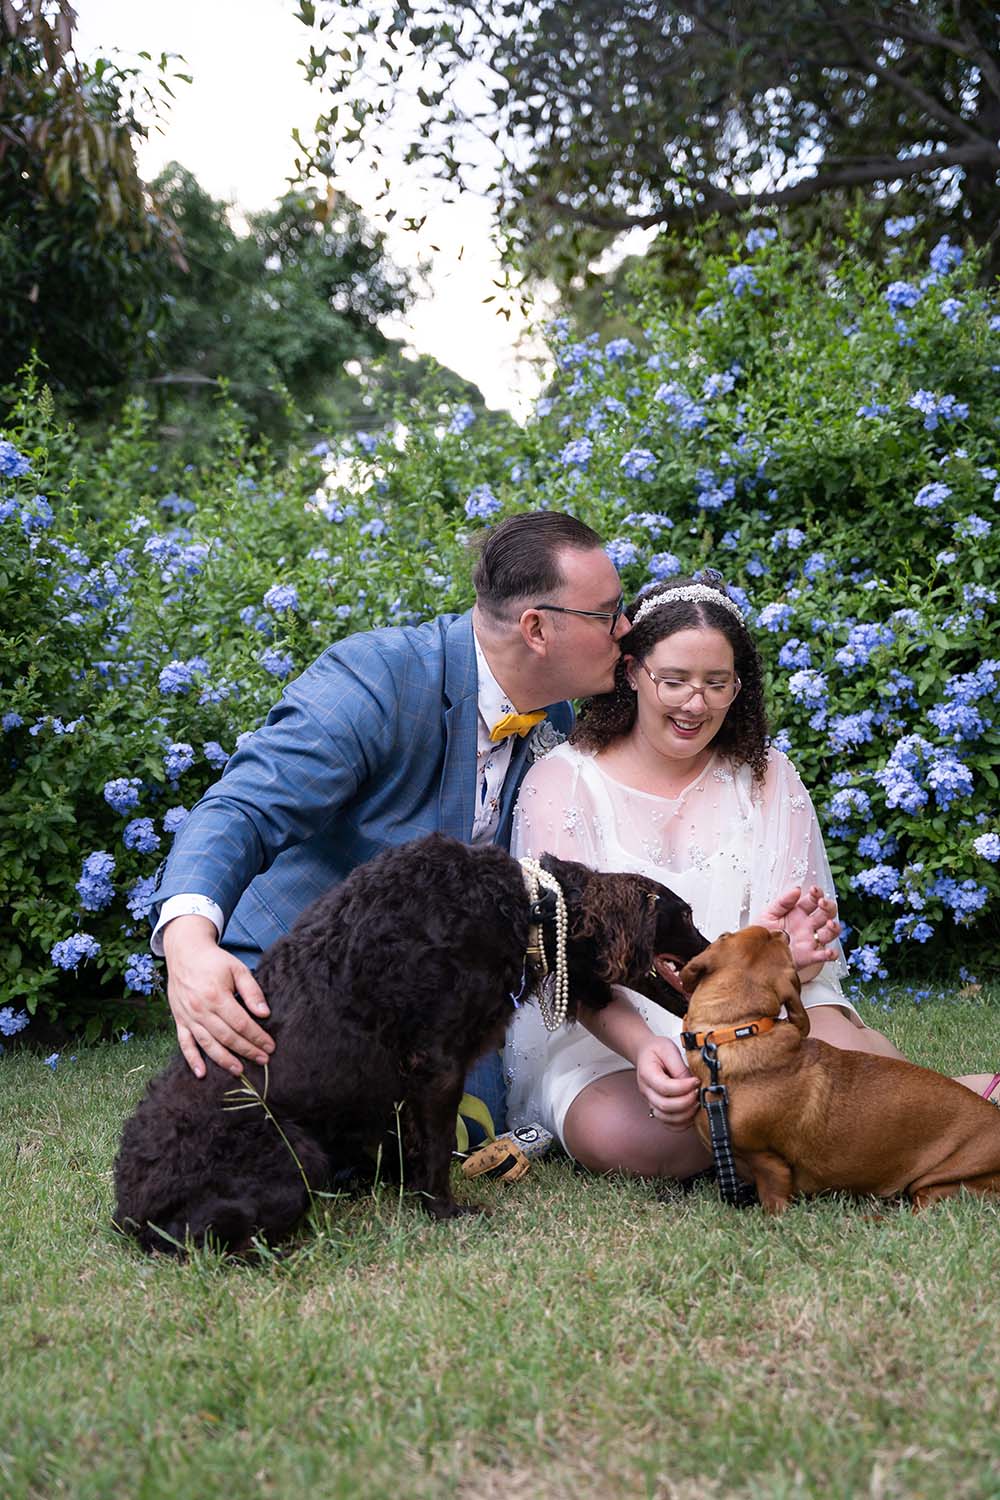 Wedding Photography - Bride and Groom with dogs